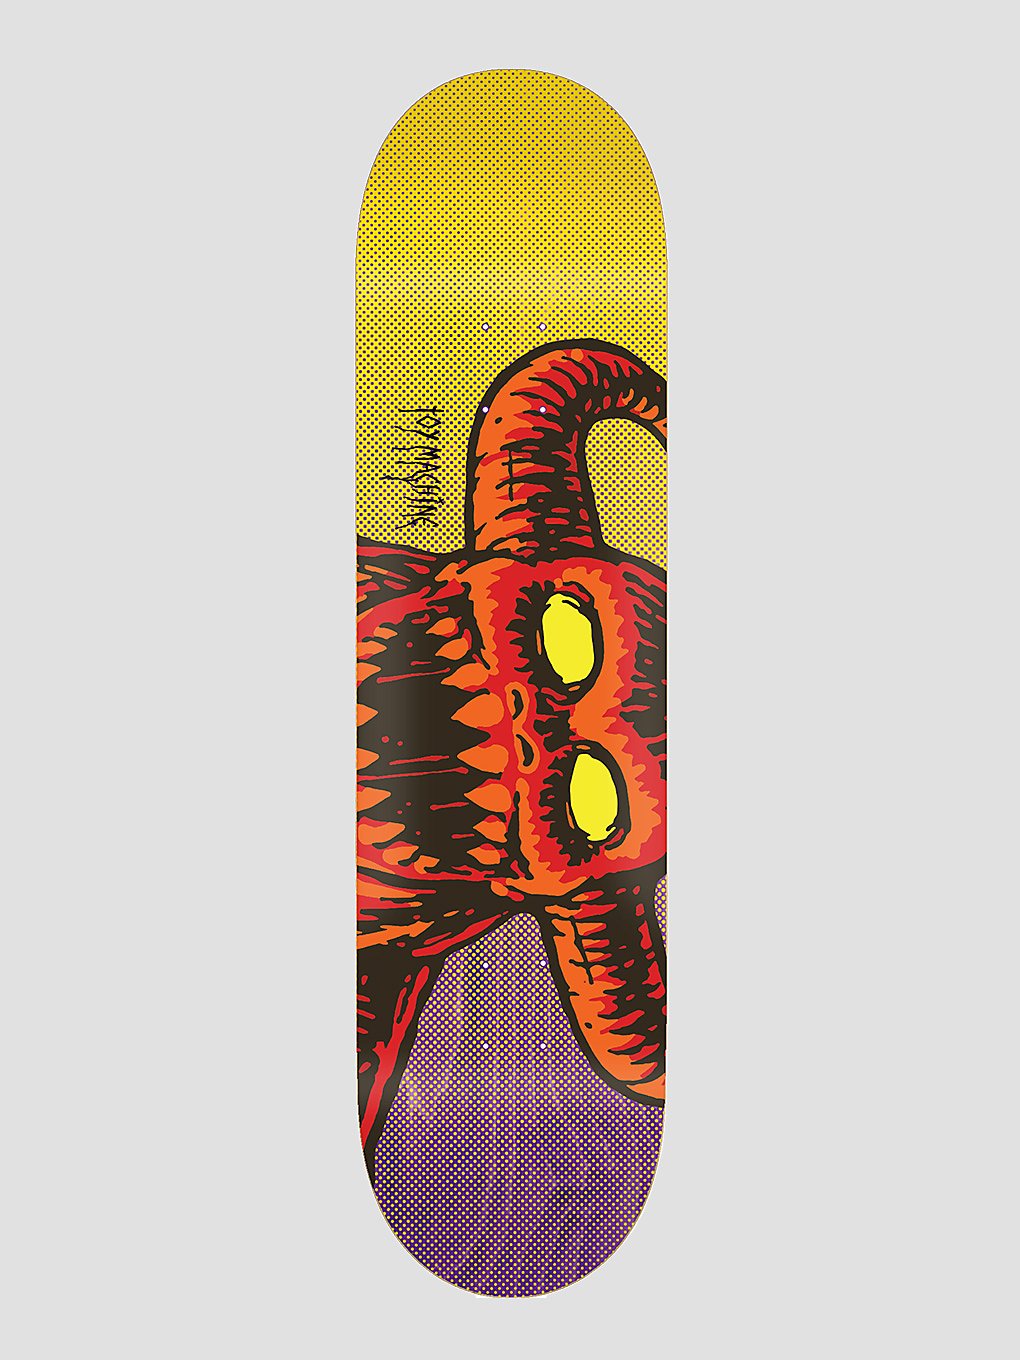 Toy Machine Vice Hell Monster 8.38" Skateboard Deck various stains kaufen